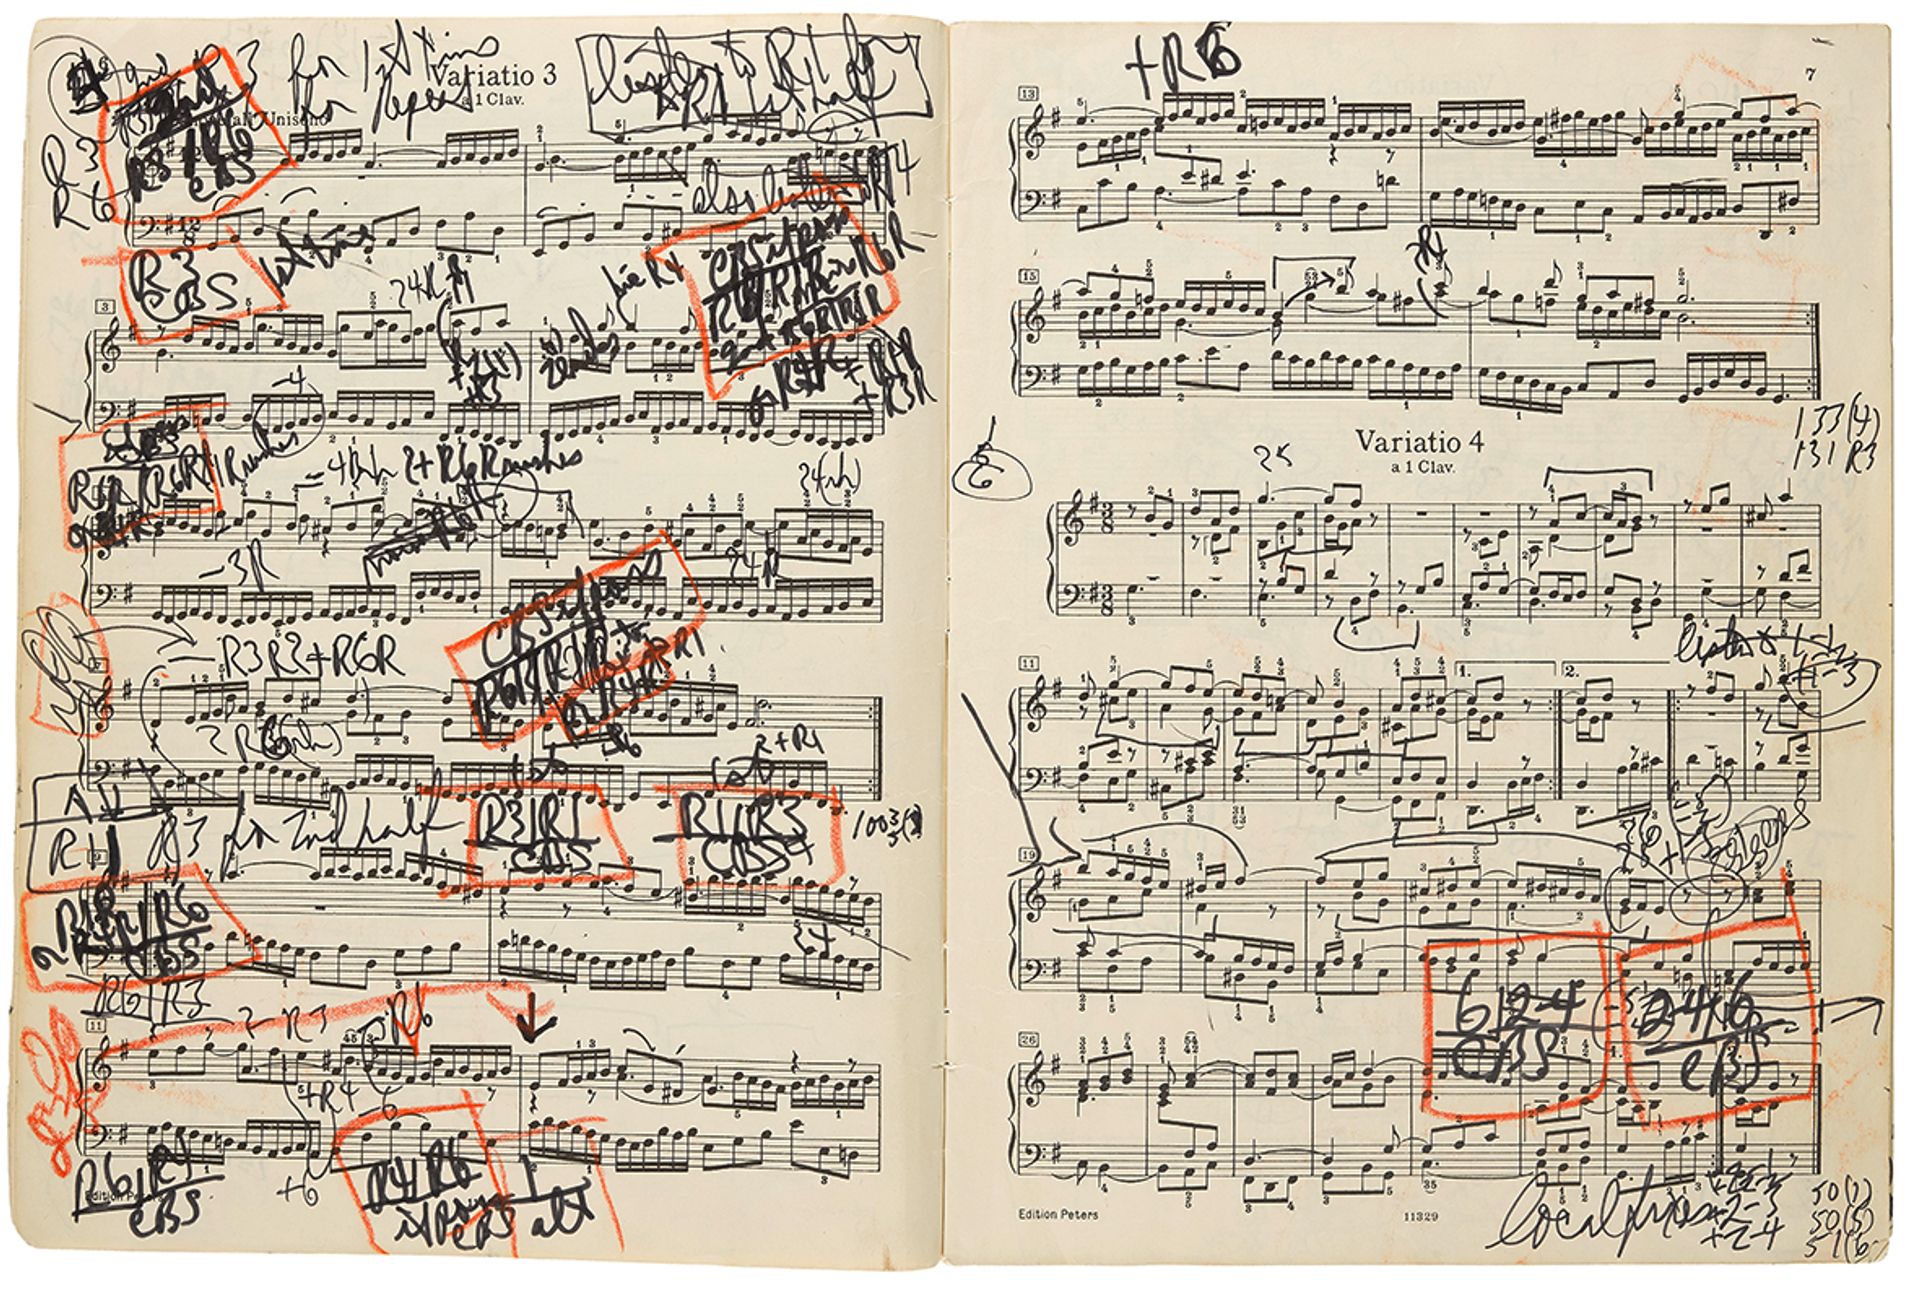 Glenn Gould’s marked-up score for Bach’s “Goldberg” Variations, used in his celebrated 1981 recording, is estimated to fetch more than $100,000 Bonhams